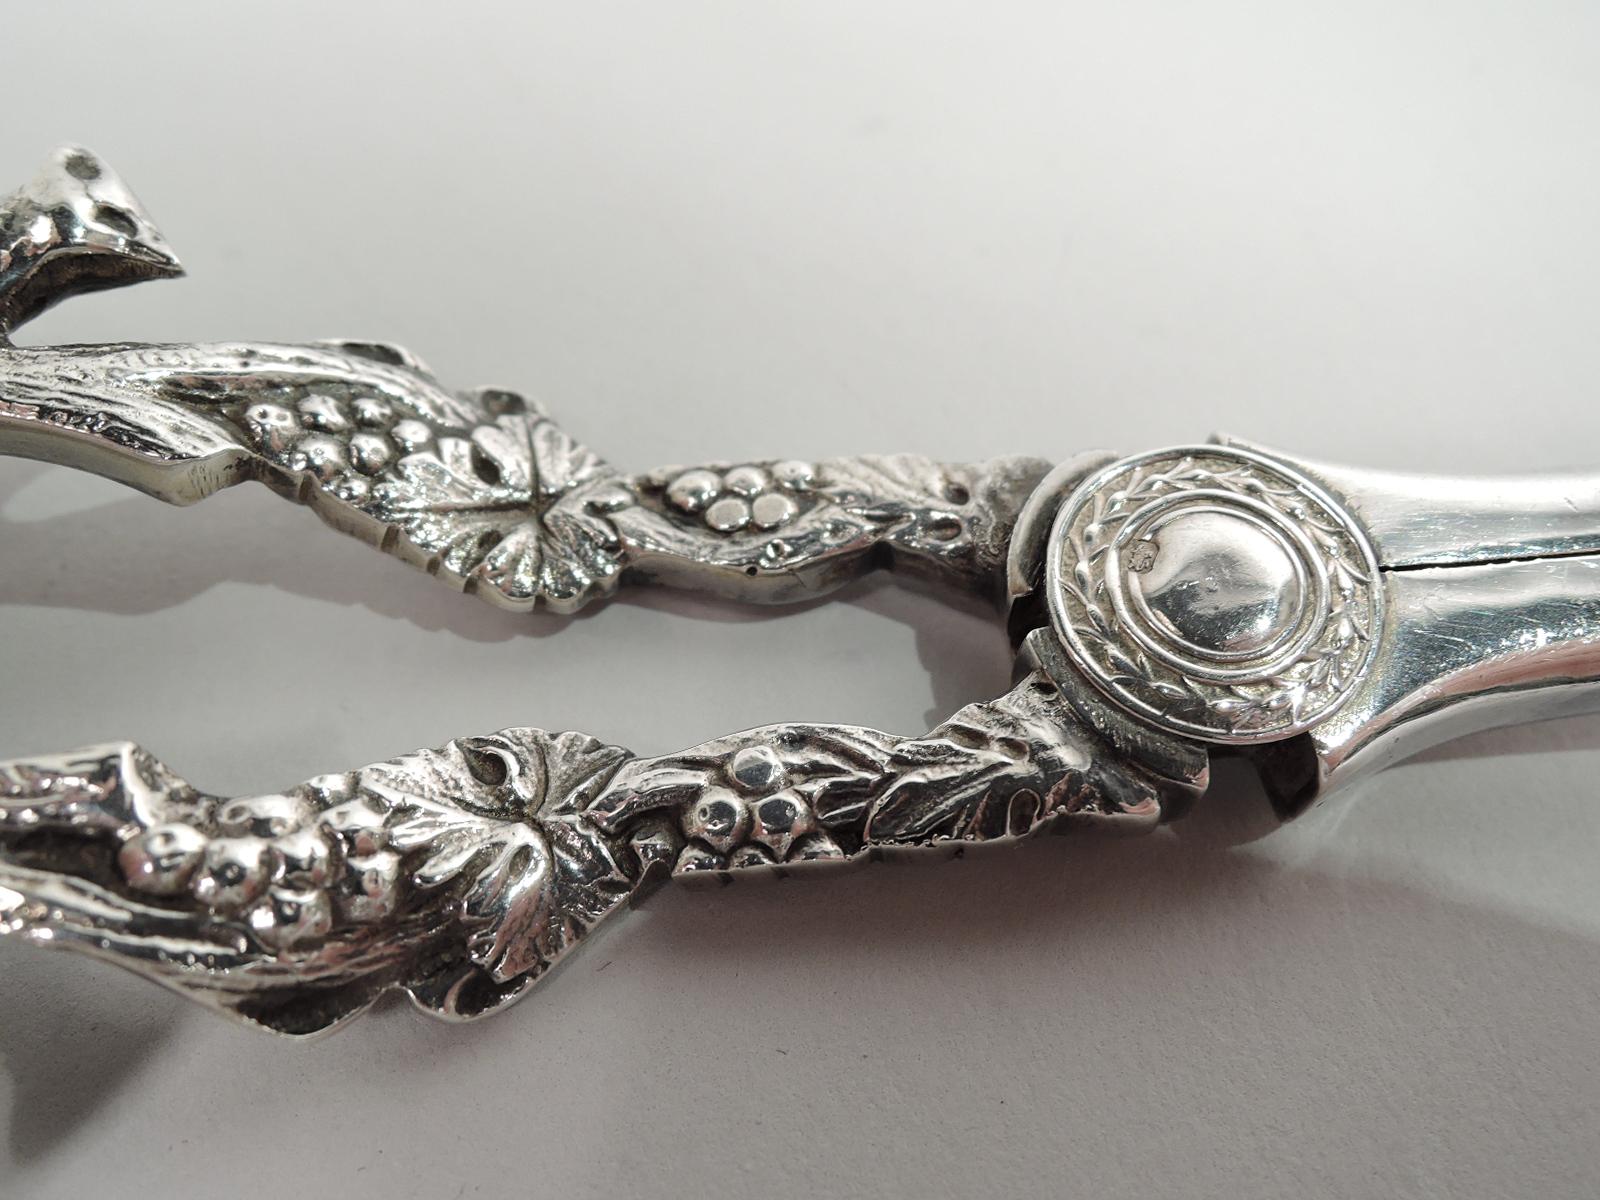 Mid-20th Century English Sterling Silver Grape Shears with Aesop Theme